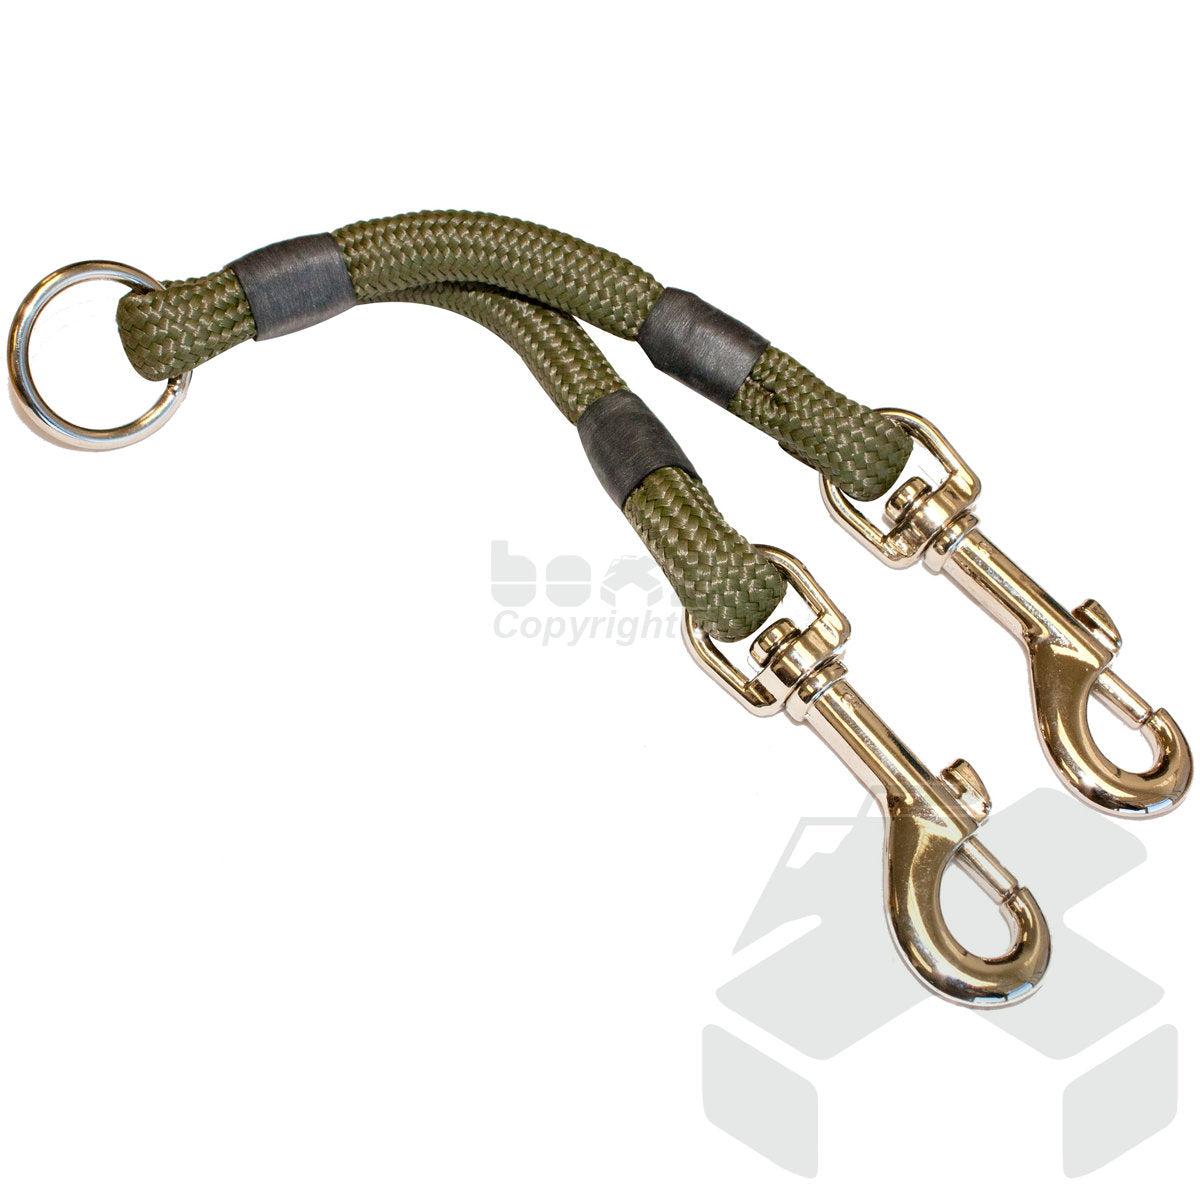 Bisley Double Clip Brace Dog Lead - Two Dog 12" Attachment - Green